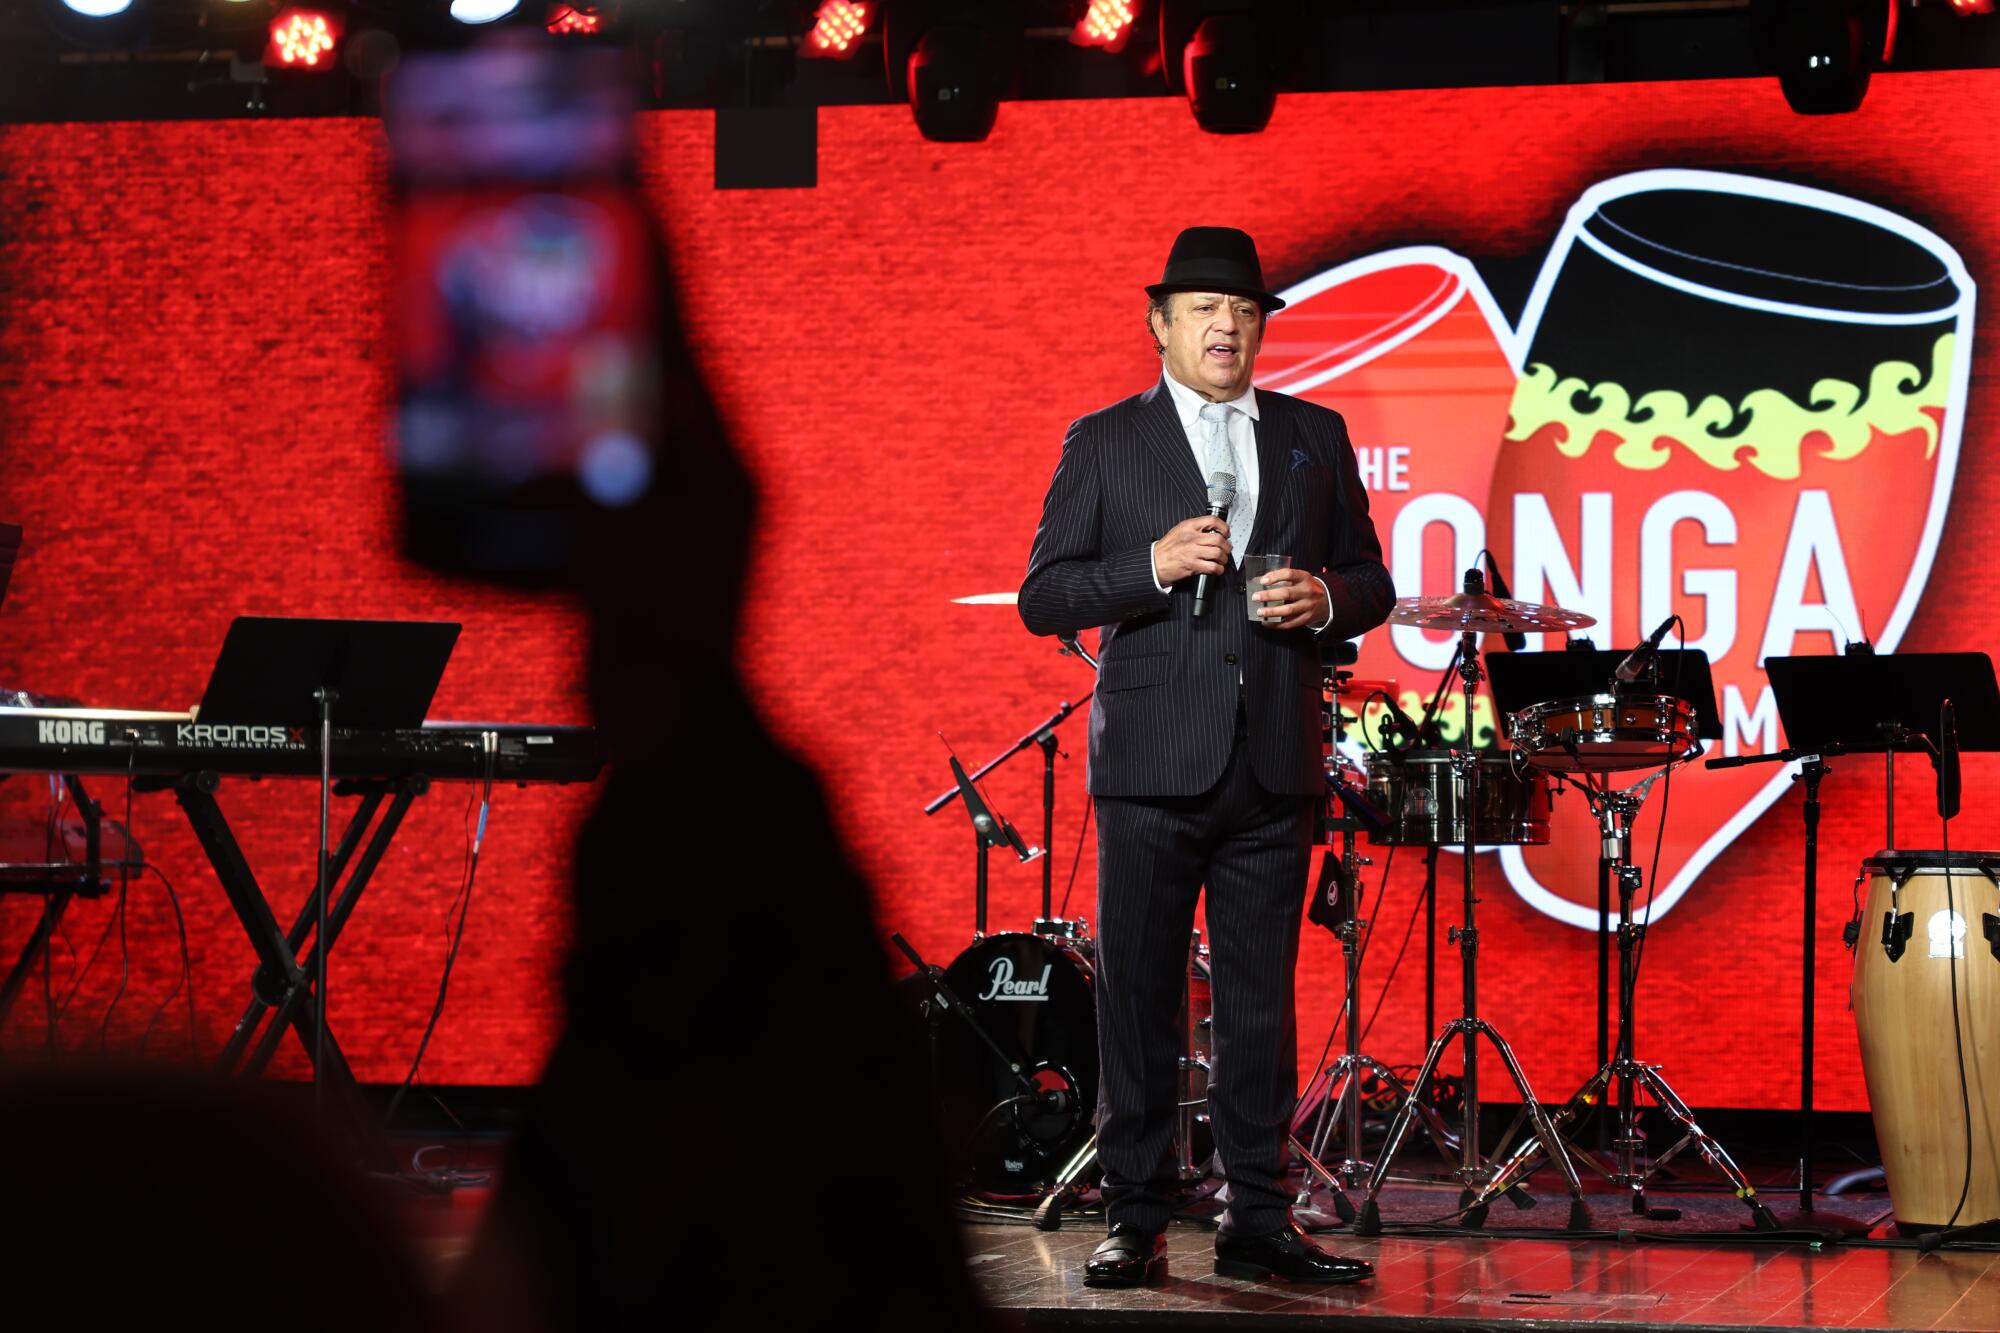 Comedian Paul Rodriguez entertains at the Conga Room during a farewell show after 25 years in business.